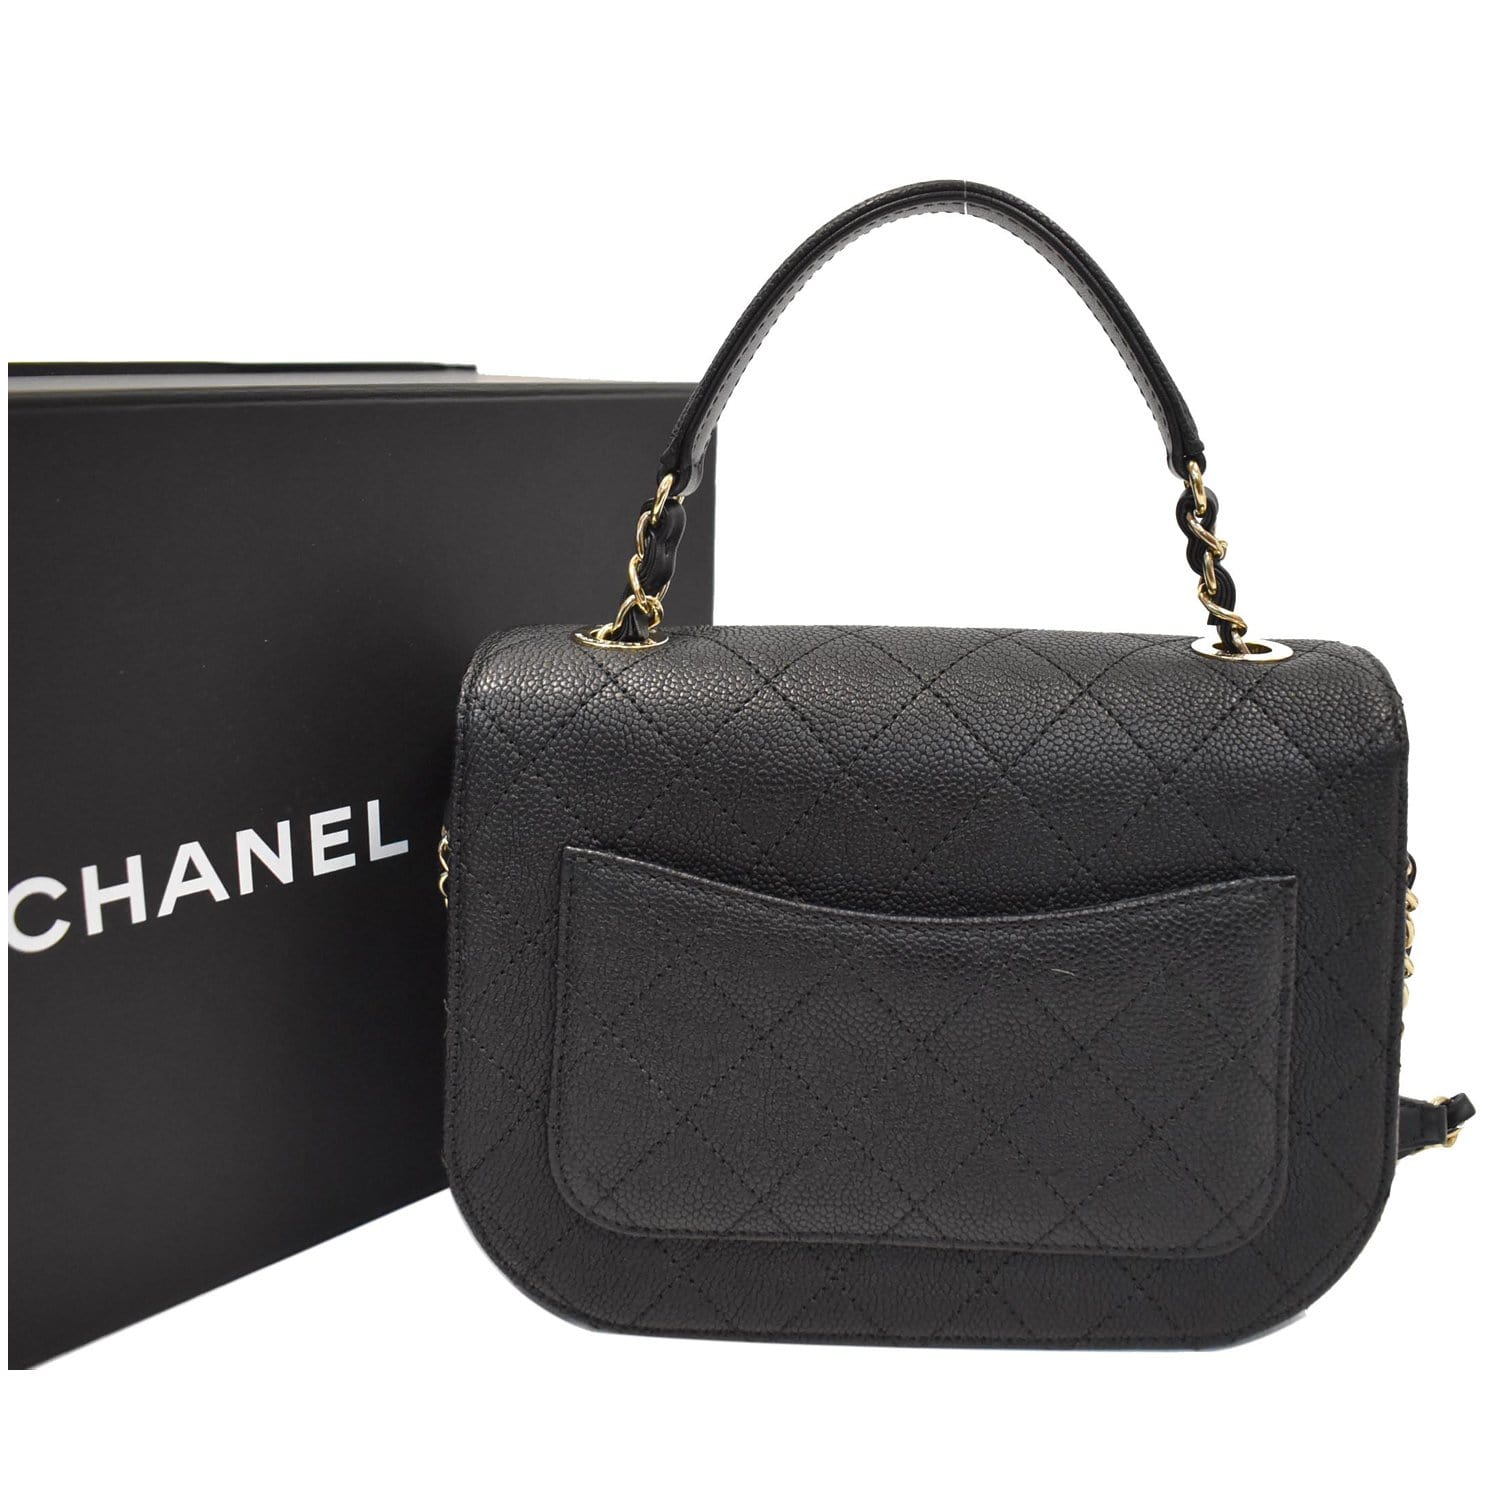 Coco handle leather handbag Chanel Black in Leather - 36841584